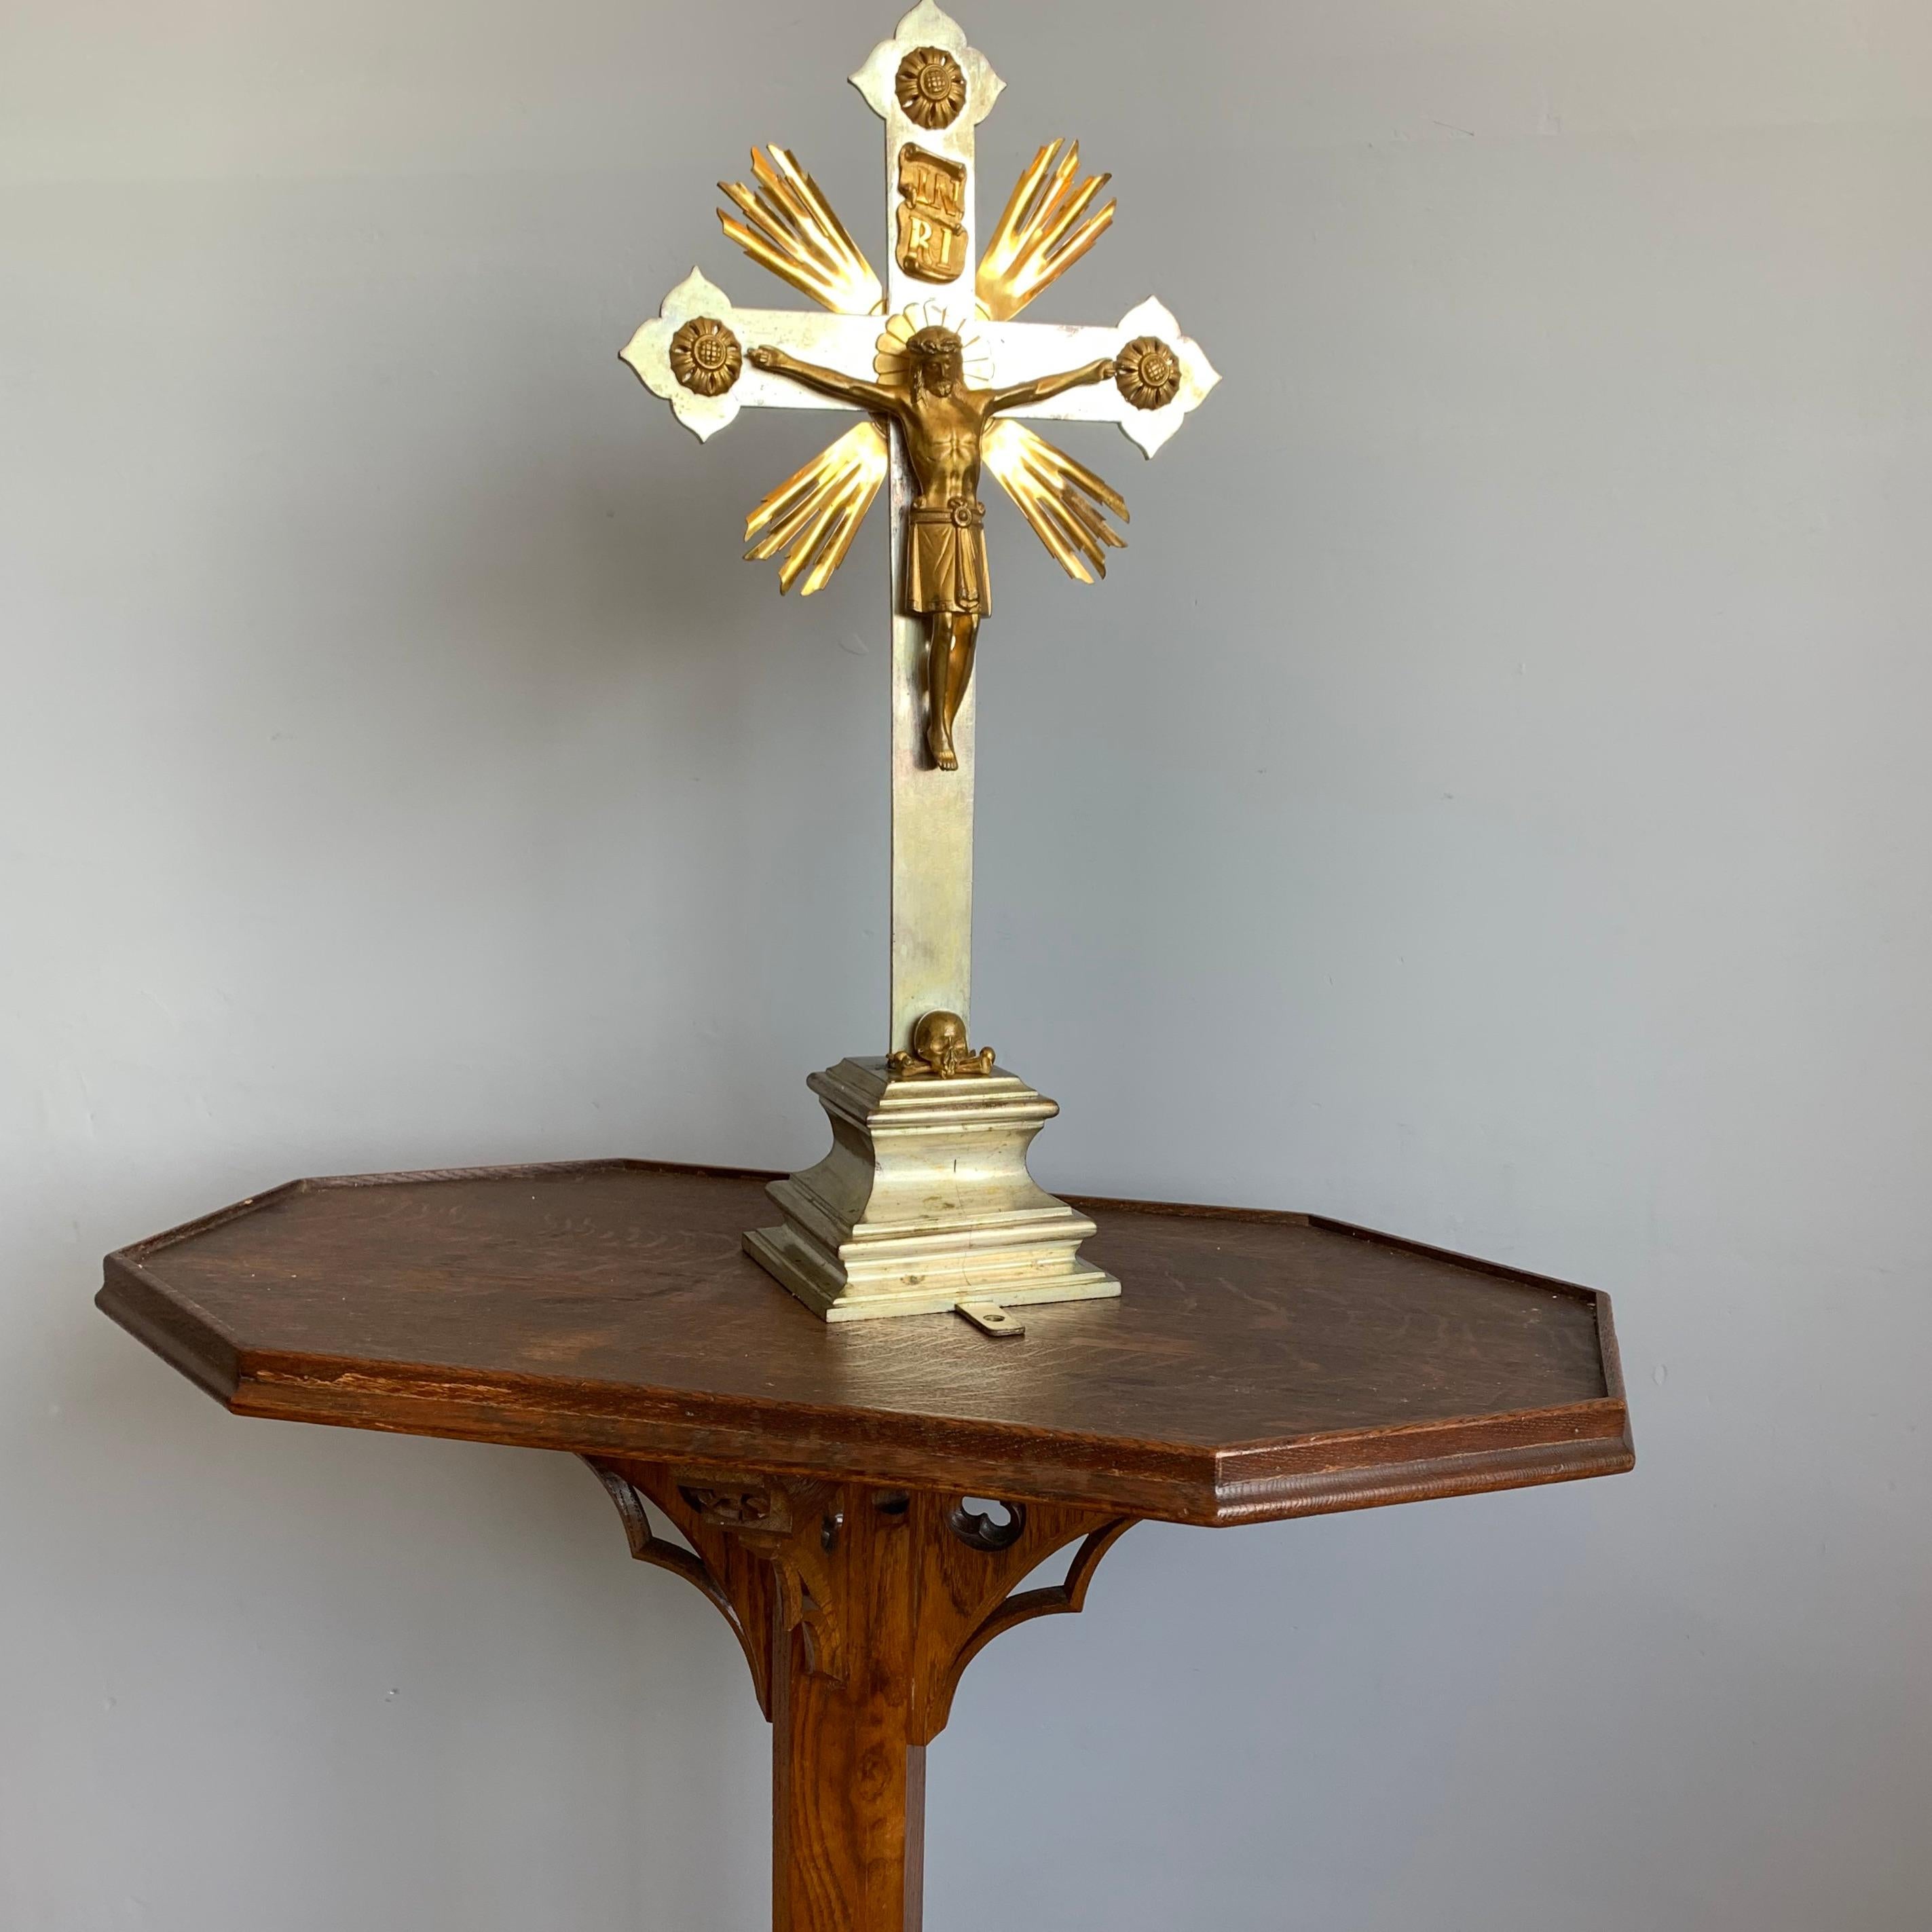 Good size and impressive make, Gothic church altar crucifix.

This ornate and all hand-crafted, bronze table crucifix comes with a good quality made and finely detailed, gilt bronze corpus of Christ. This former church altar table crucifix is